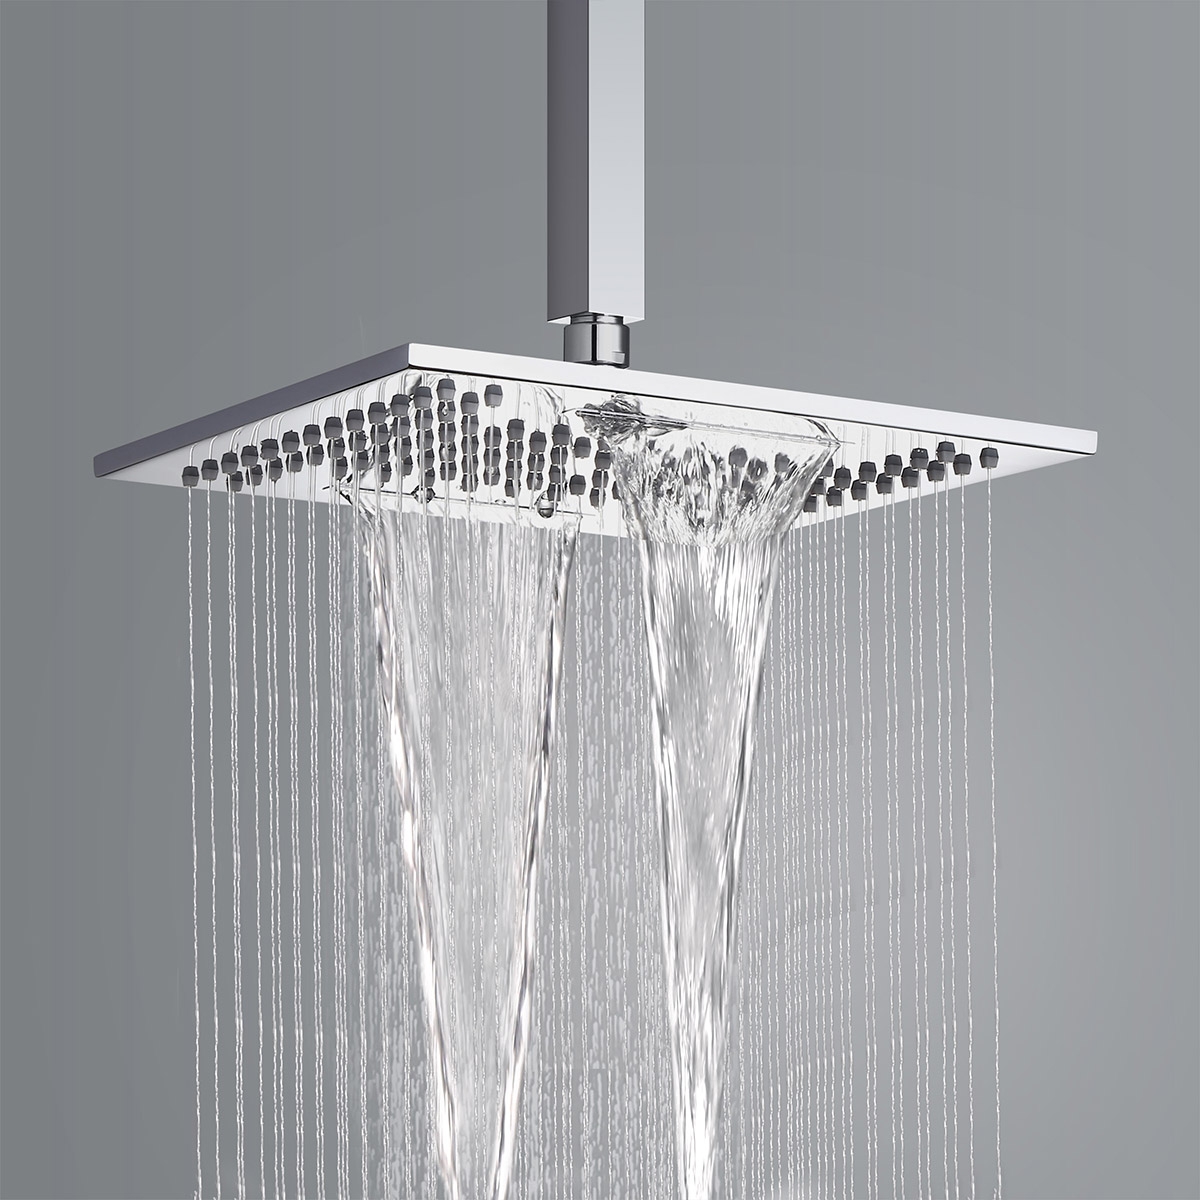 10" Waterfall Square Rain Shower Head Two Functional In Polished Chrome Solid Brass